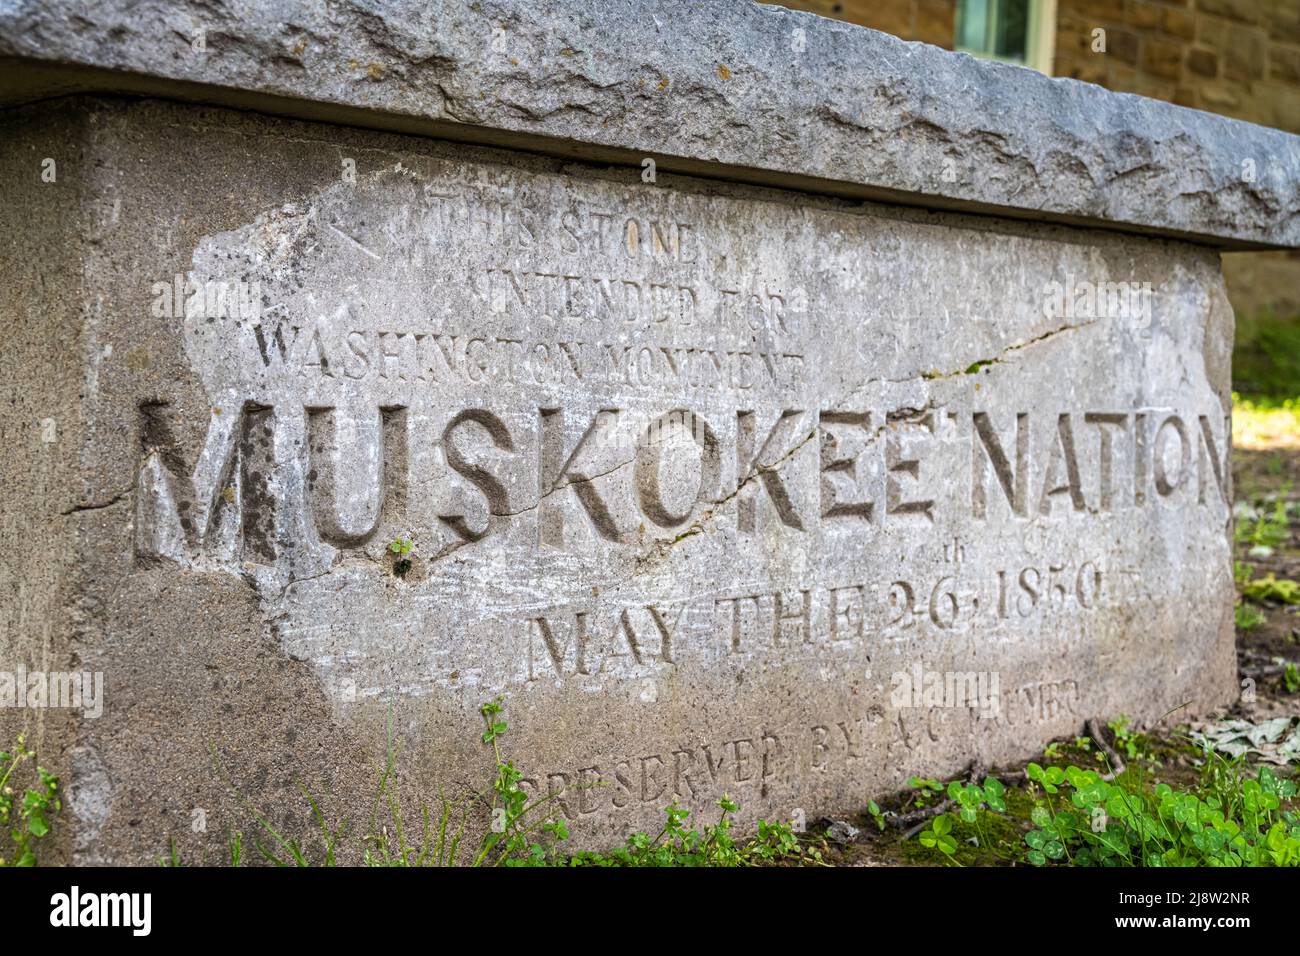 Muskokee Nation 1850 engraved stone (intended for the Washington Monument) at the Five Civilized Tribes Museum in Muskogee, Oklahoma. (USA) Stock Photo